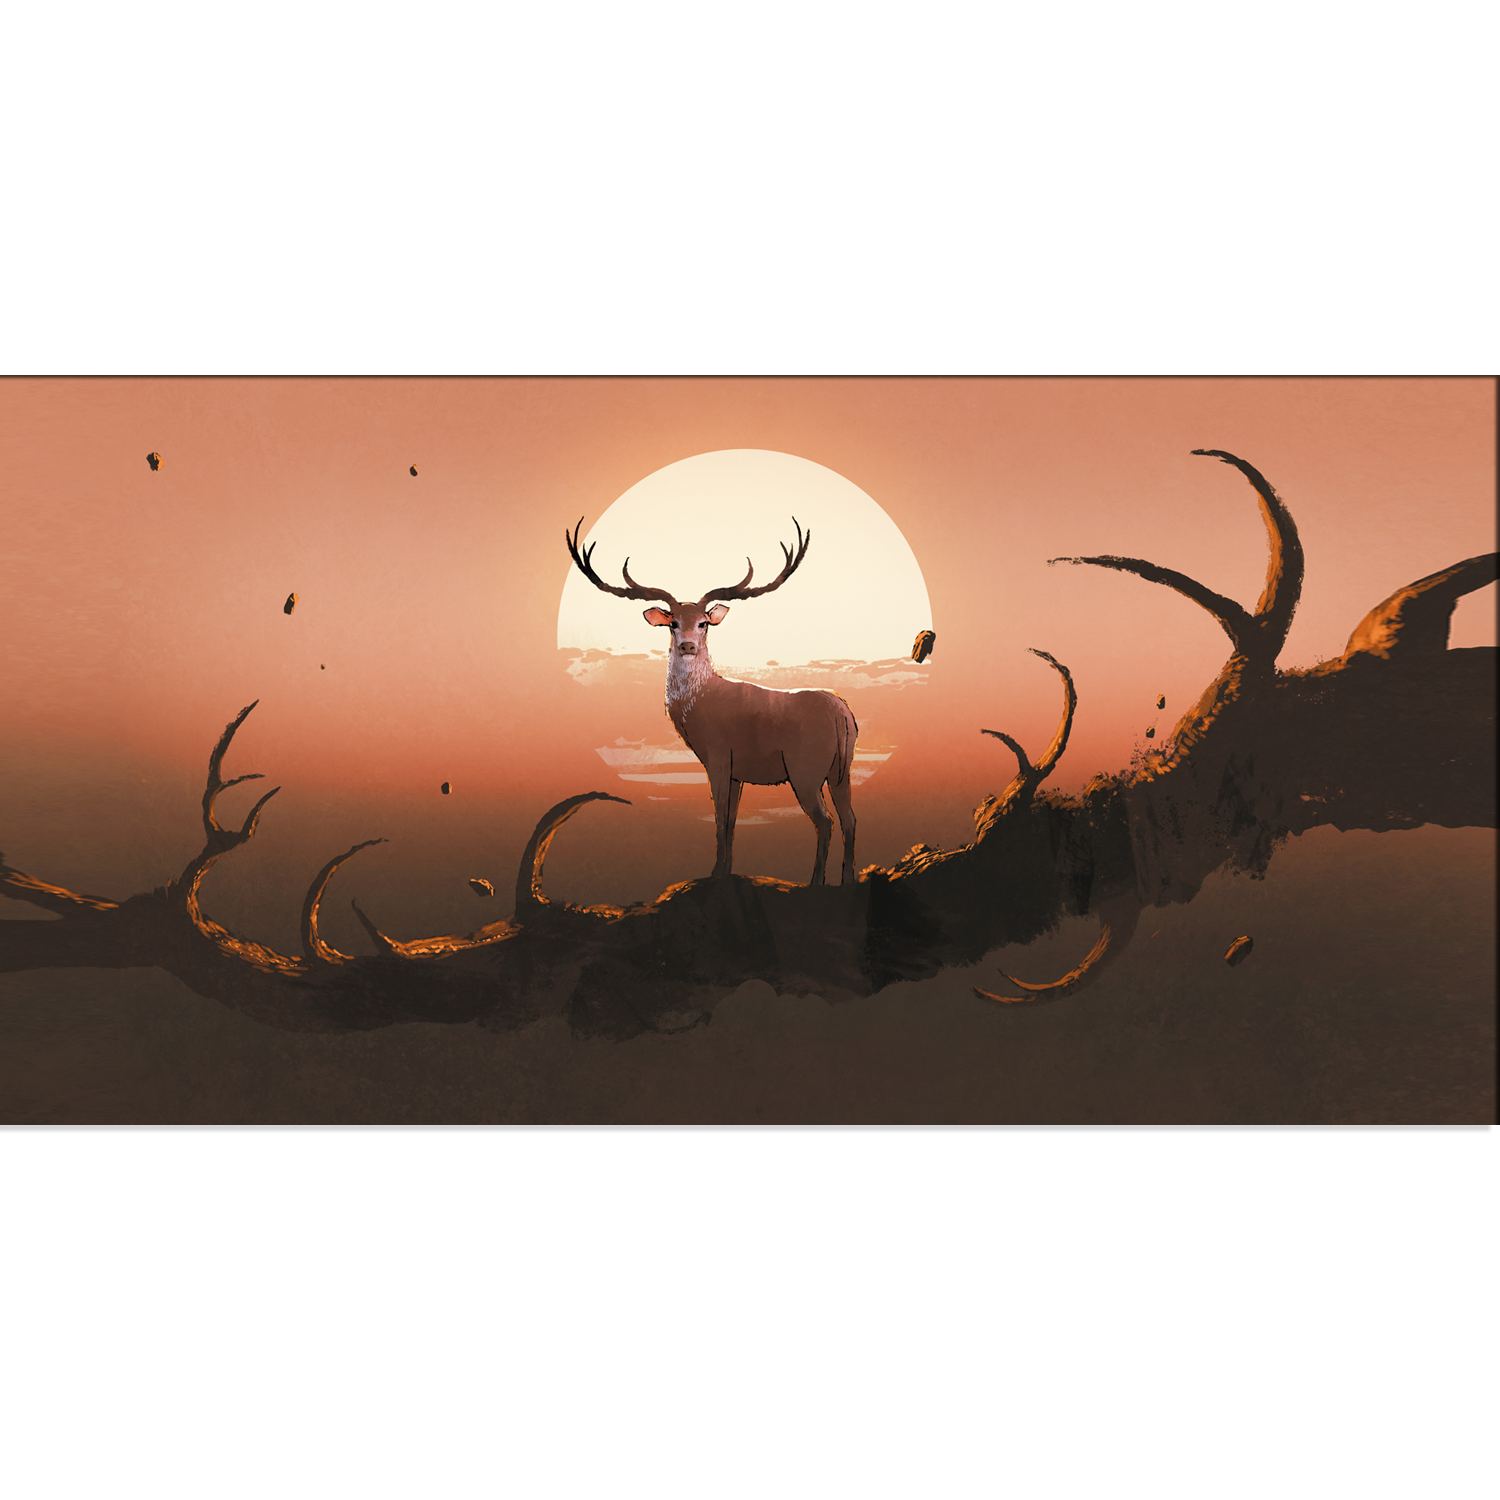 Deer Painting Canvas With evening sunsite  Wall Painting